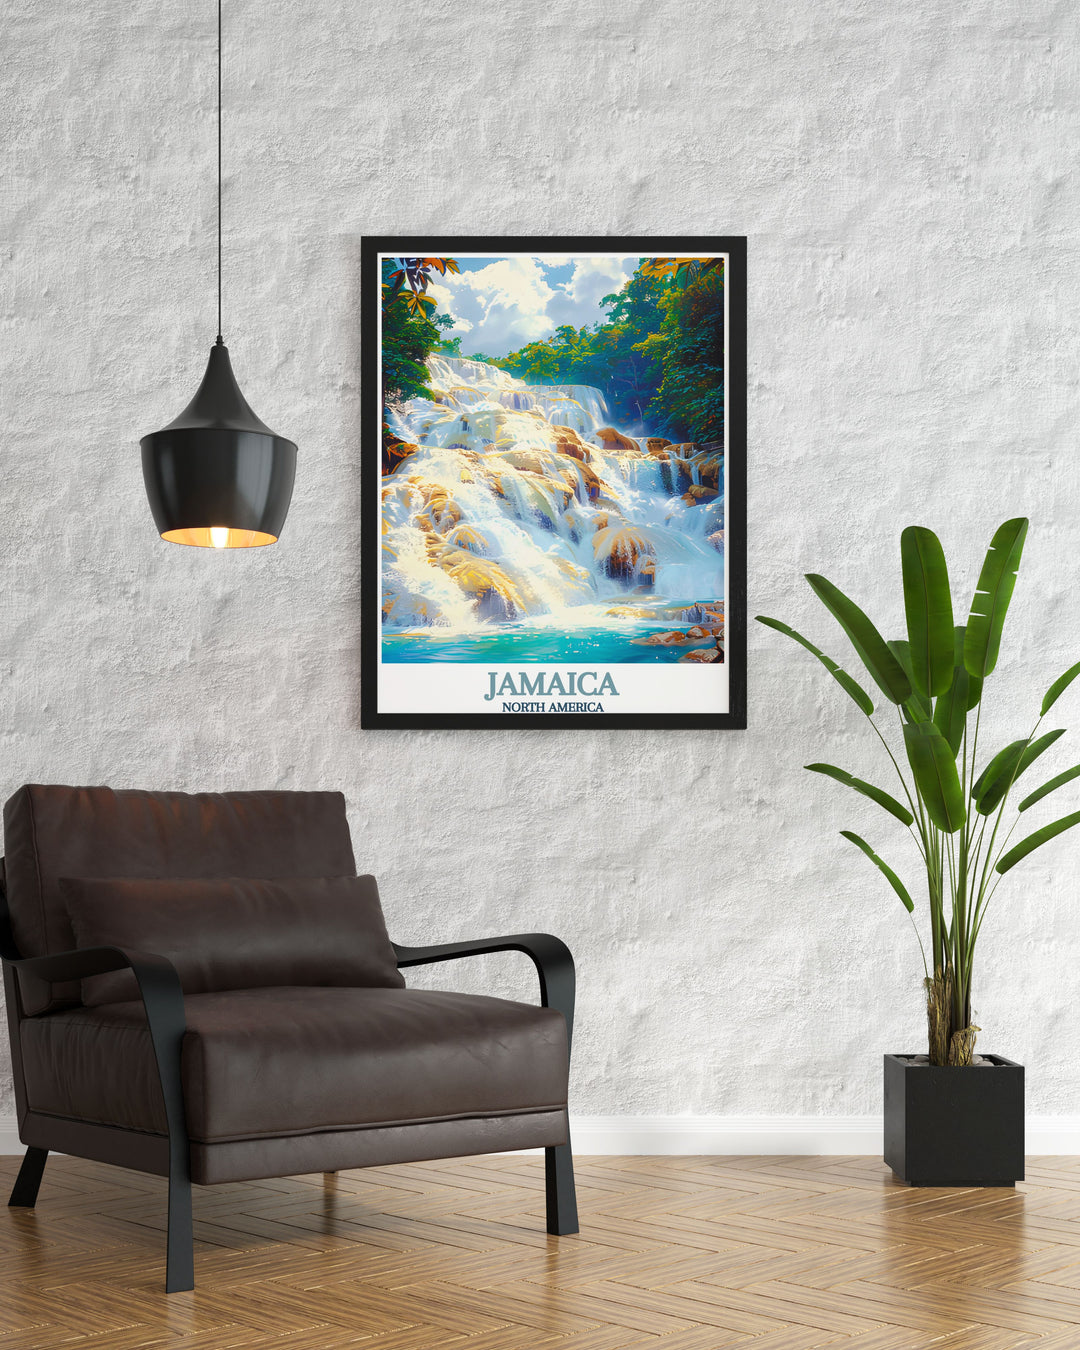 This travel poster vividly captures Dunns River Falls in Jamaica, showcasing the cascading waterfalls and lush tropical surroundings.